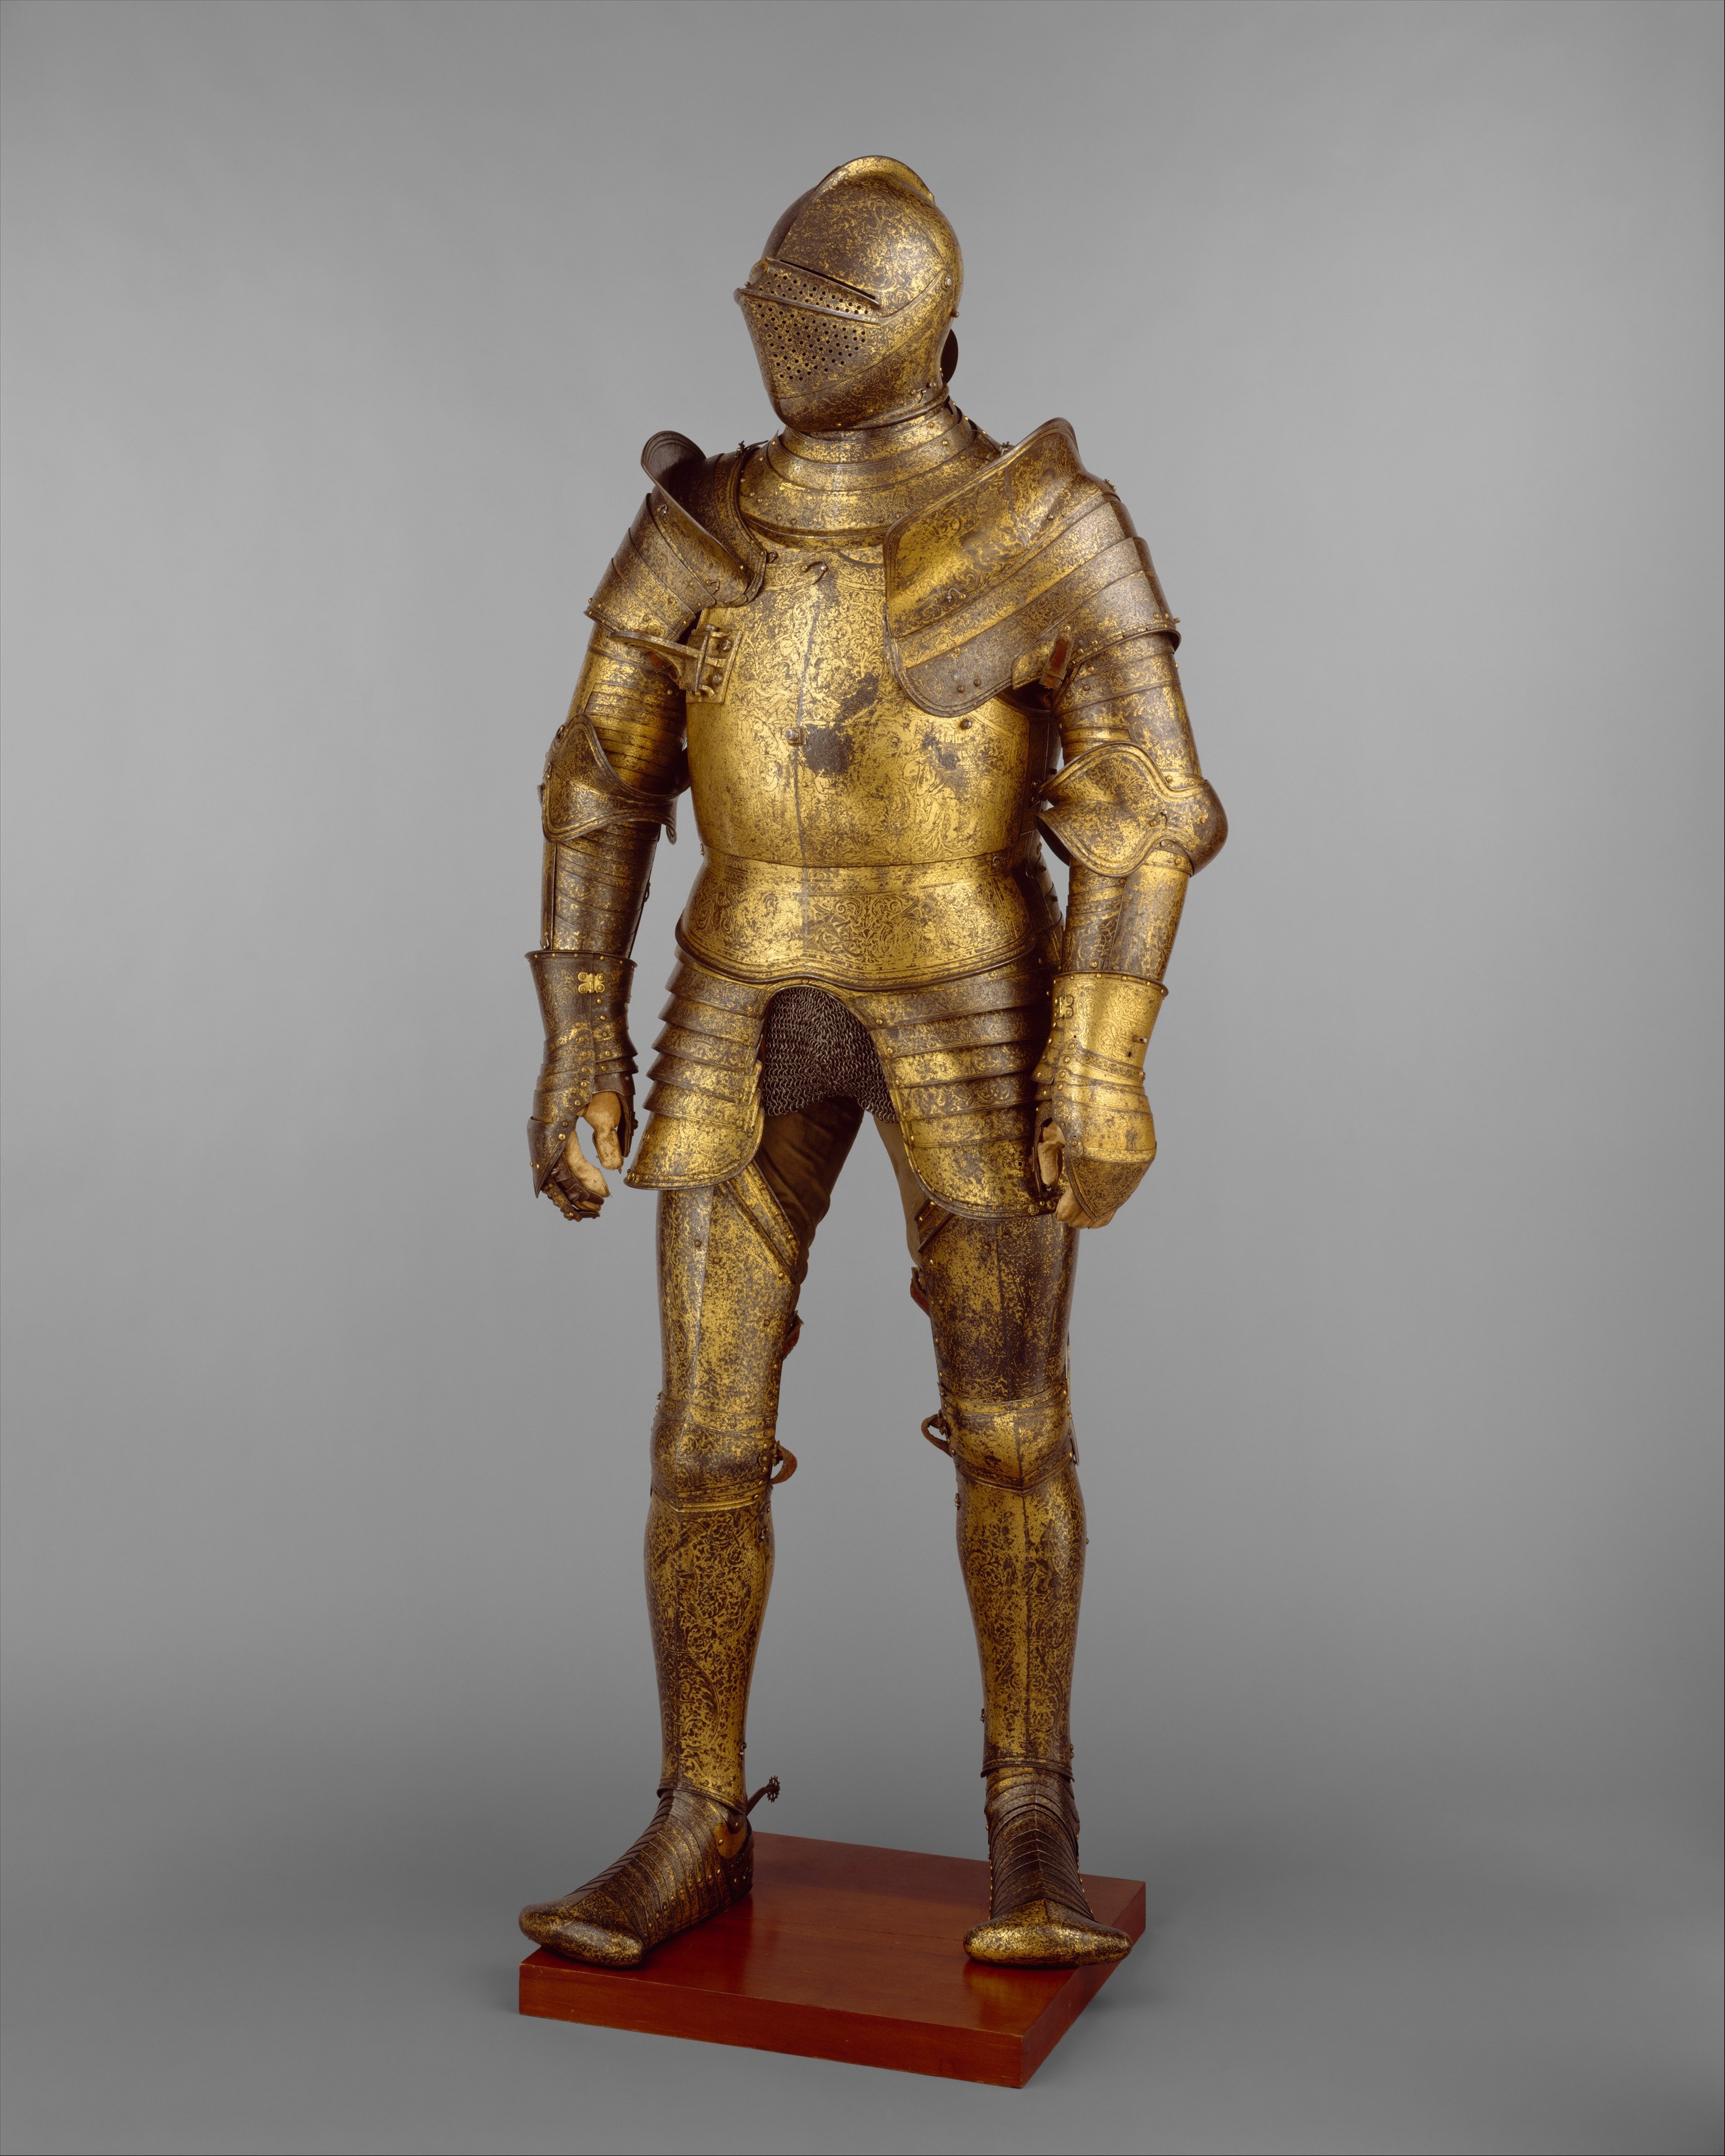 Armor Garniture, Probably of King Henry VIII of England (reigned 1509–47.)